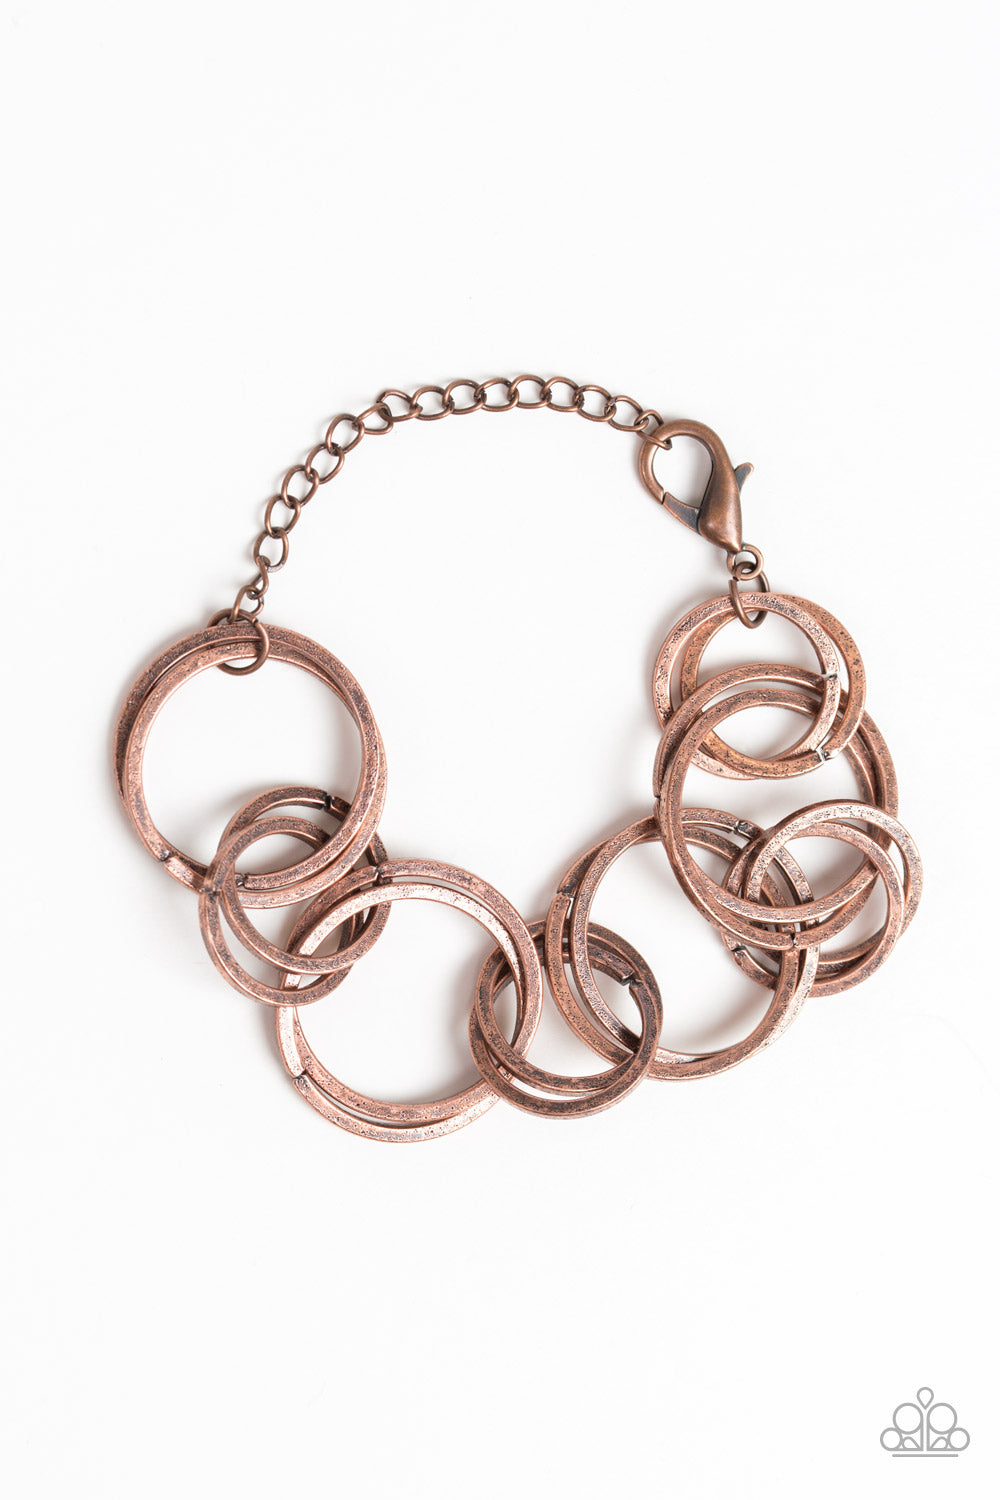 Jump Into The Ring Copper Paparazzi Necklaces Cashmere Pink Jewels - Cashmere Pink Jewels & Accessories, Cashmere Pink Jewels & Accessories - Paparazzi